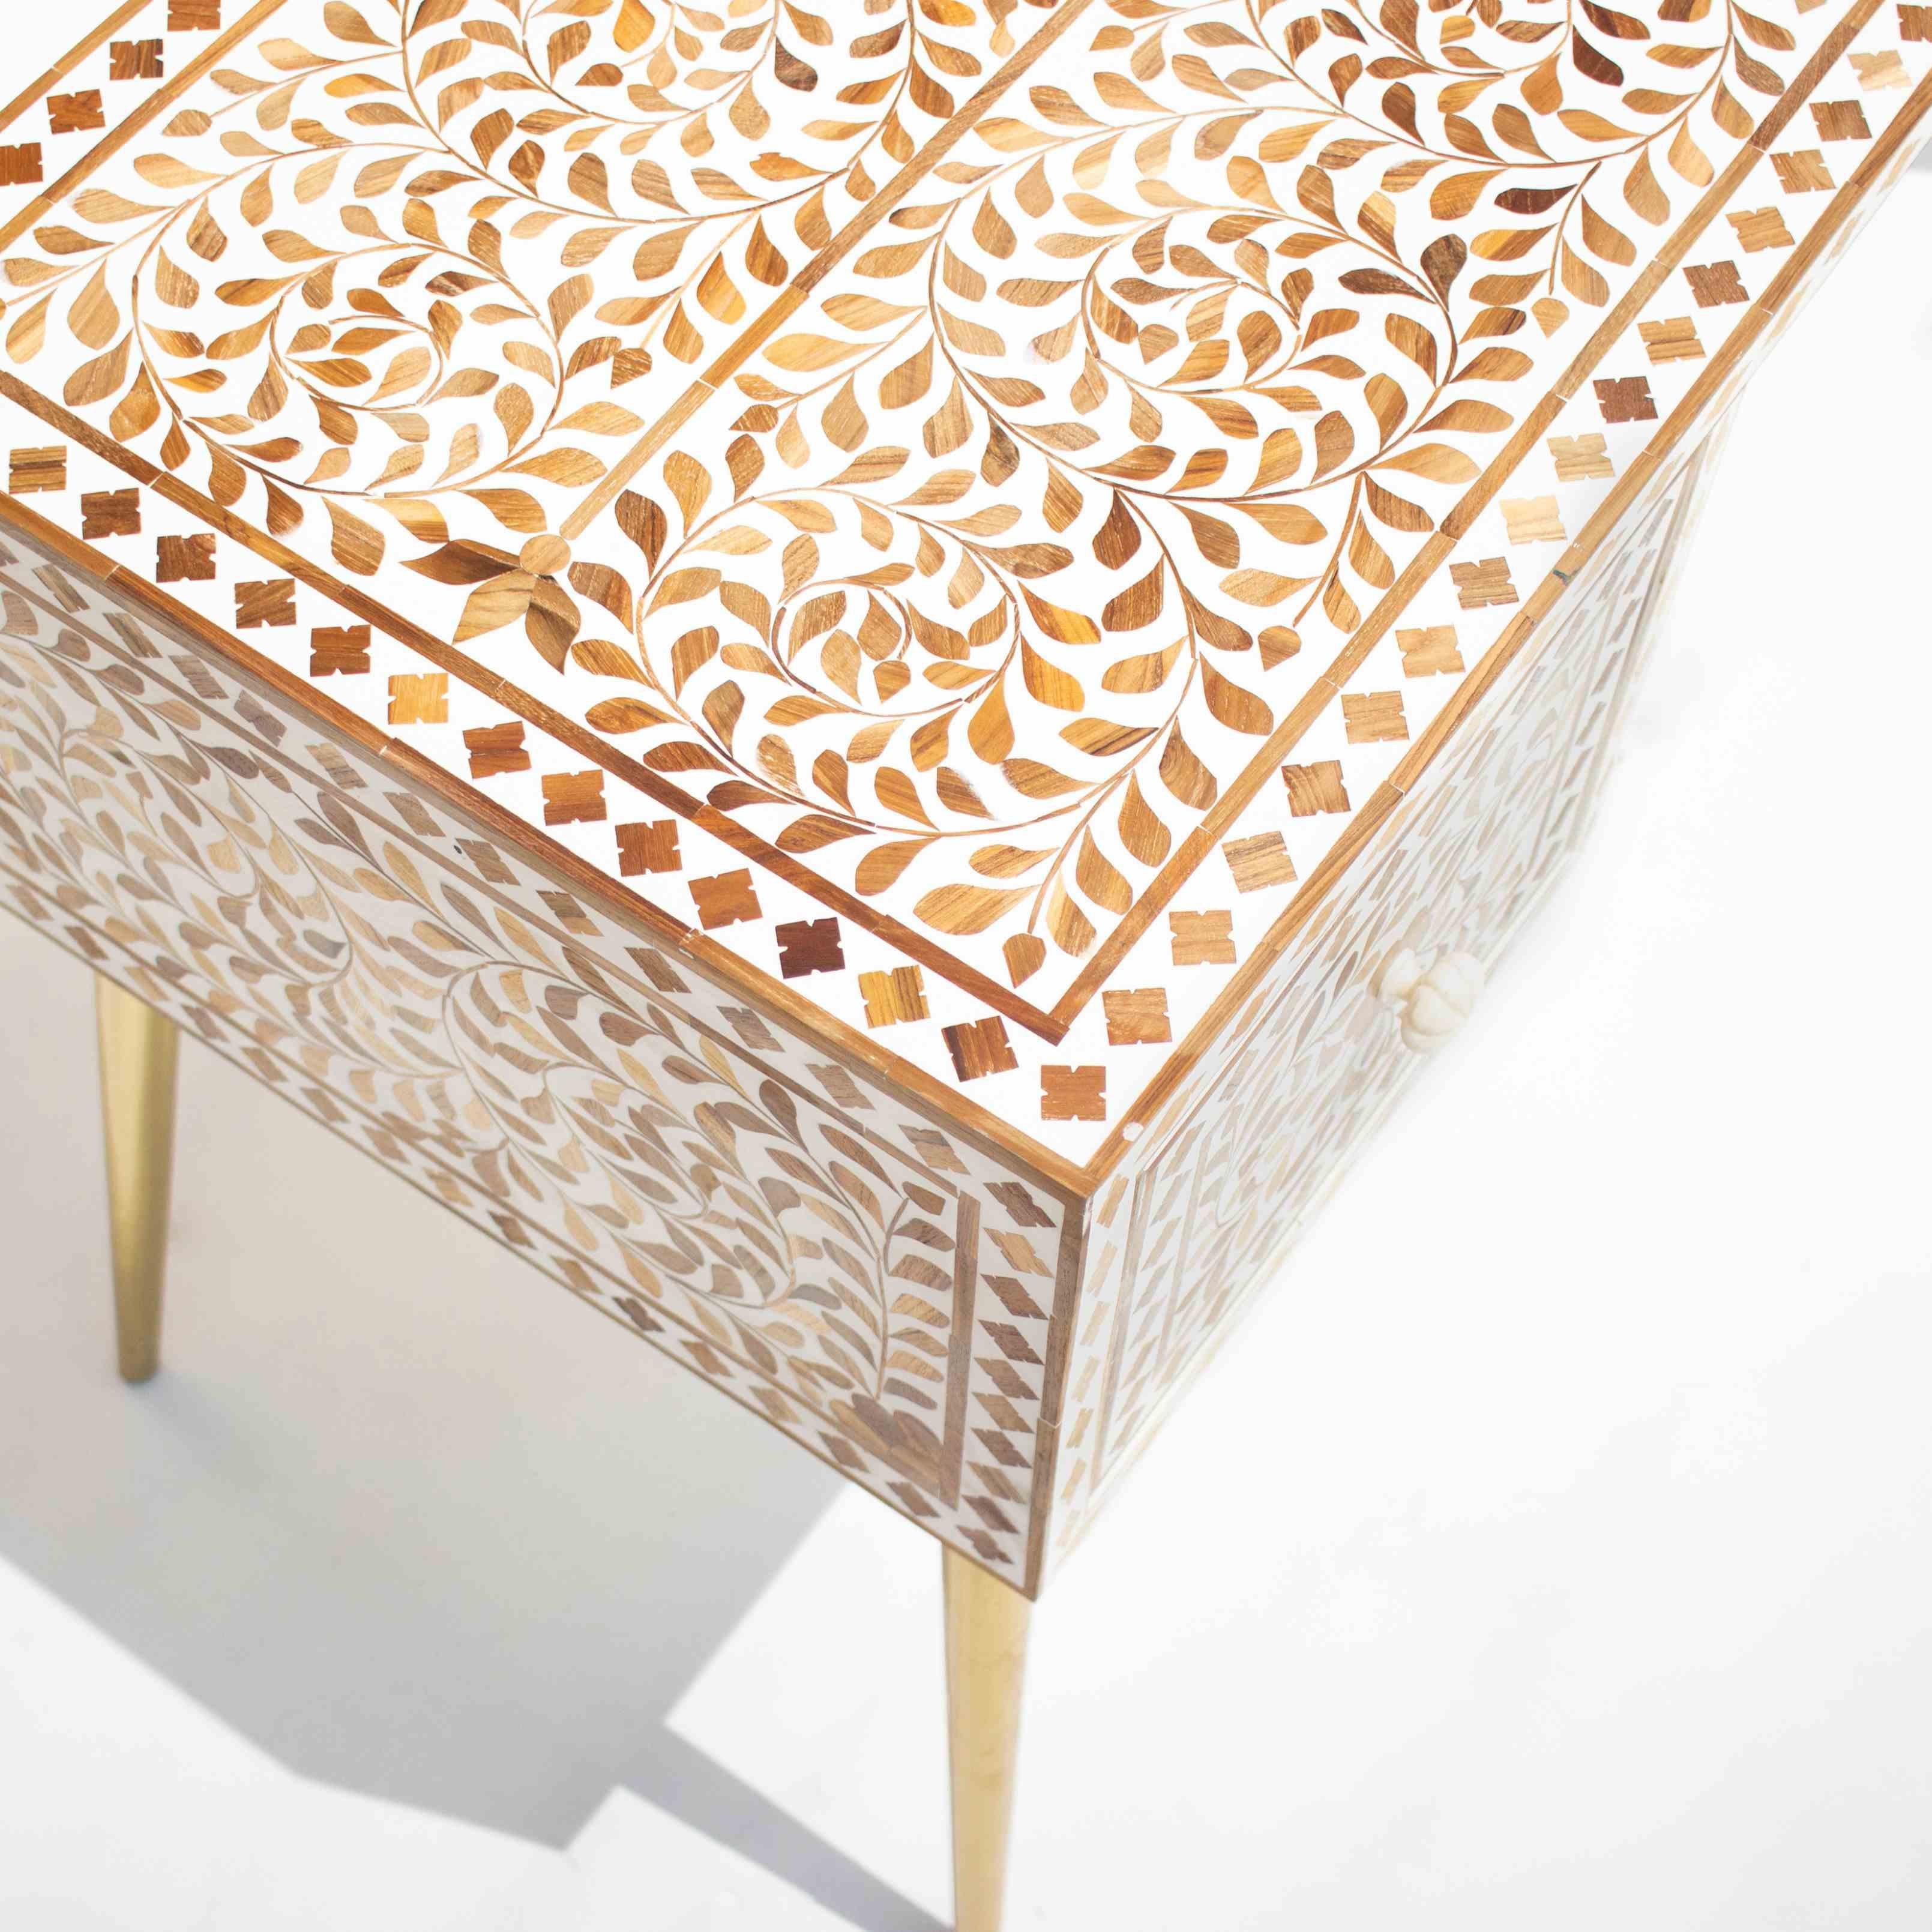 Elevate your home office or workspace with our exquisite wood inlay work desk, a stunning addition that seamlessly blends timeless craftsmanship with modern sophistication. Adorned with intricate spiral leaf and flower patterns, this desk showcases